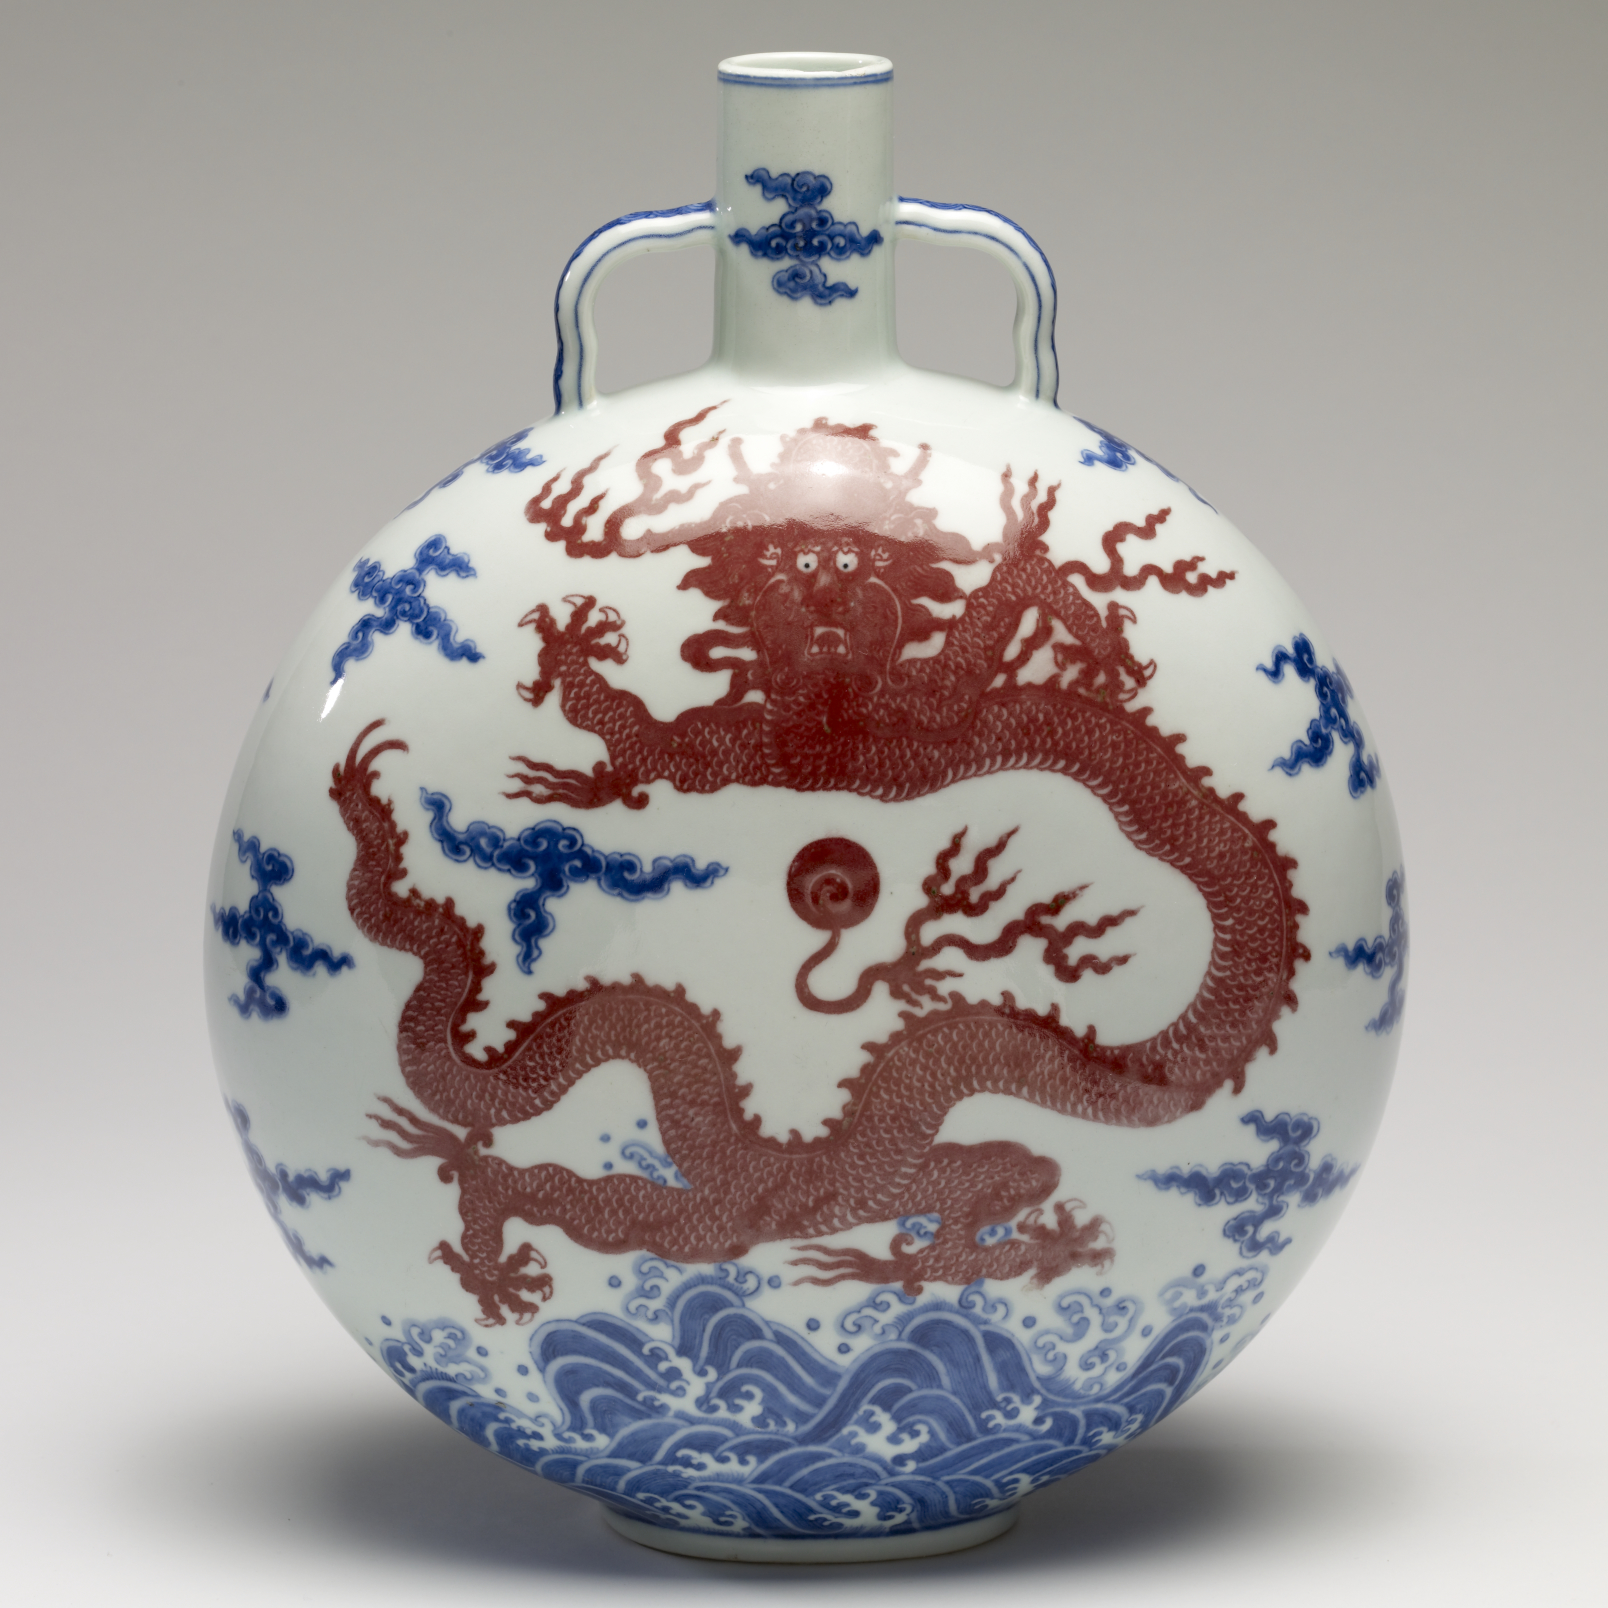 Image for Miami Presents: Objects that Changed the World - Porcelain with Michael Hatch webinar